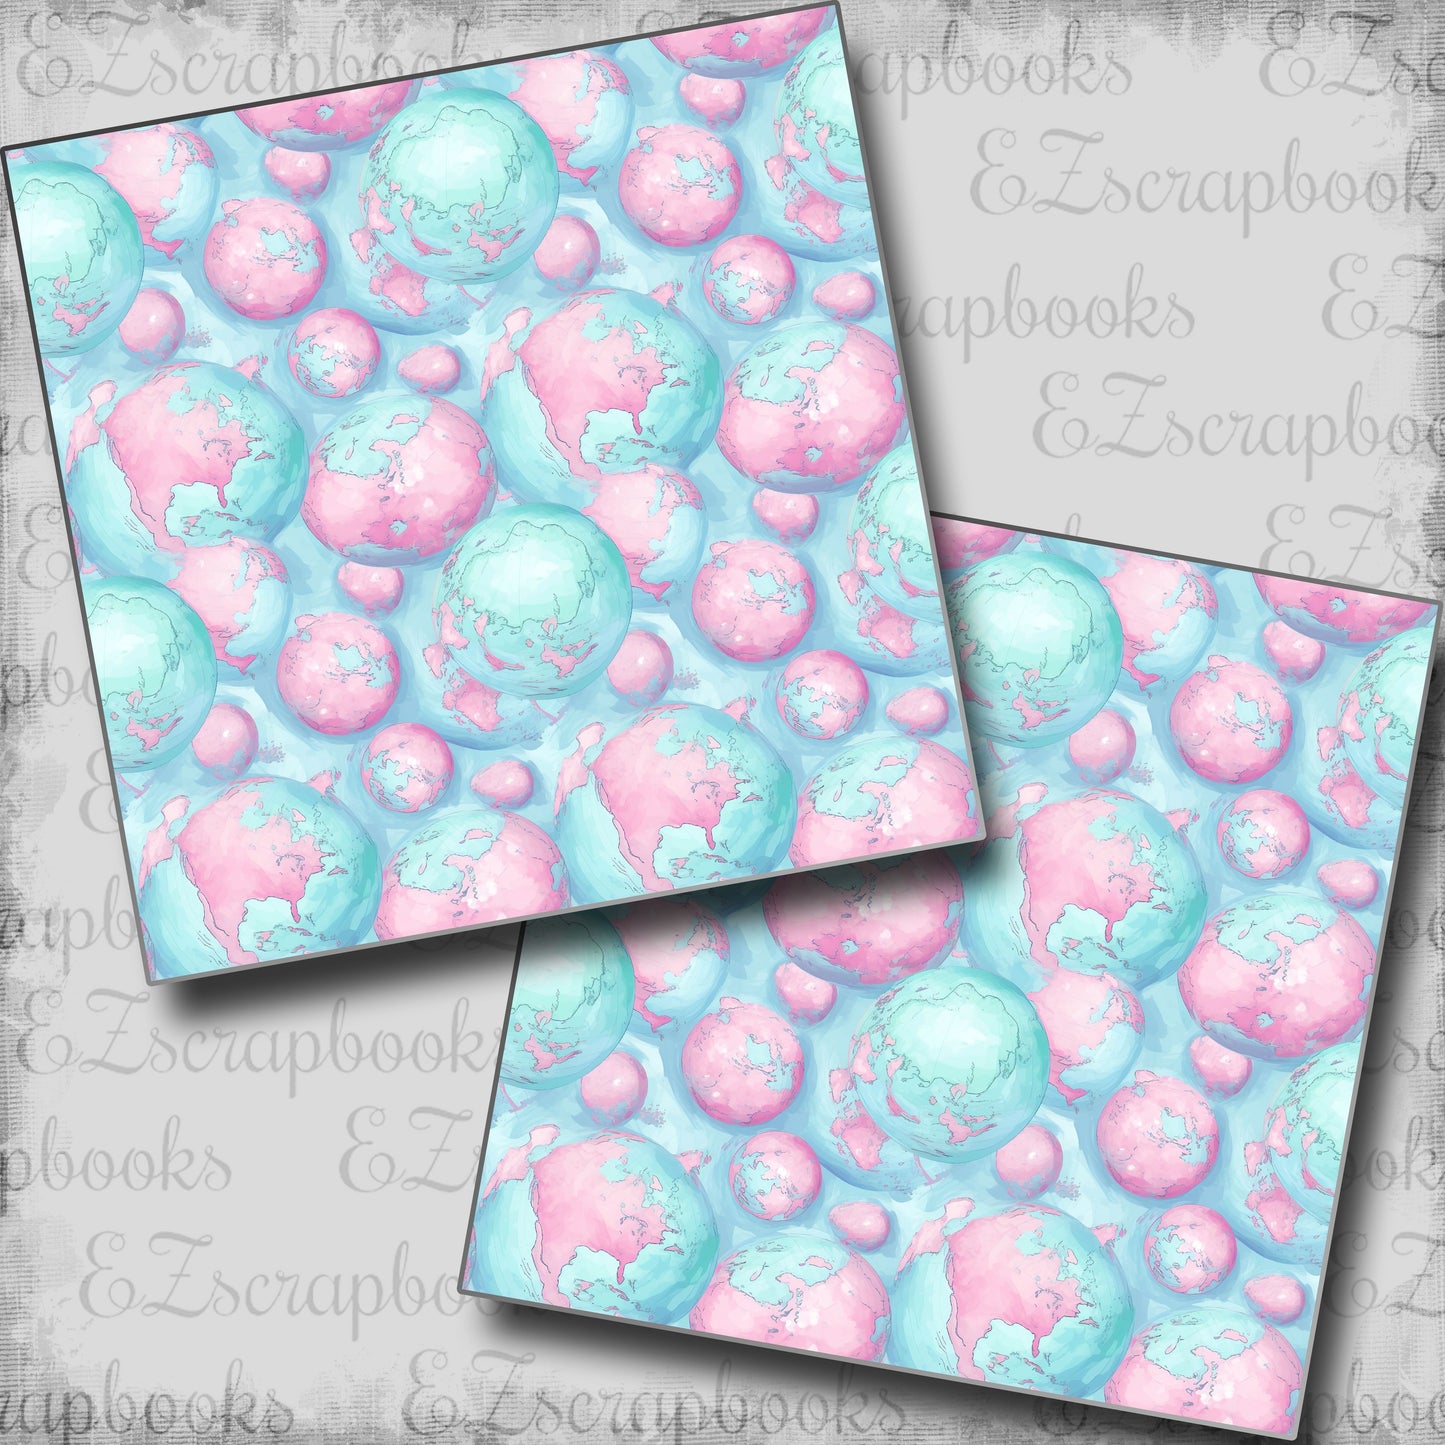 Pastel Travel Globes - Scrapbook Papers - 24-376